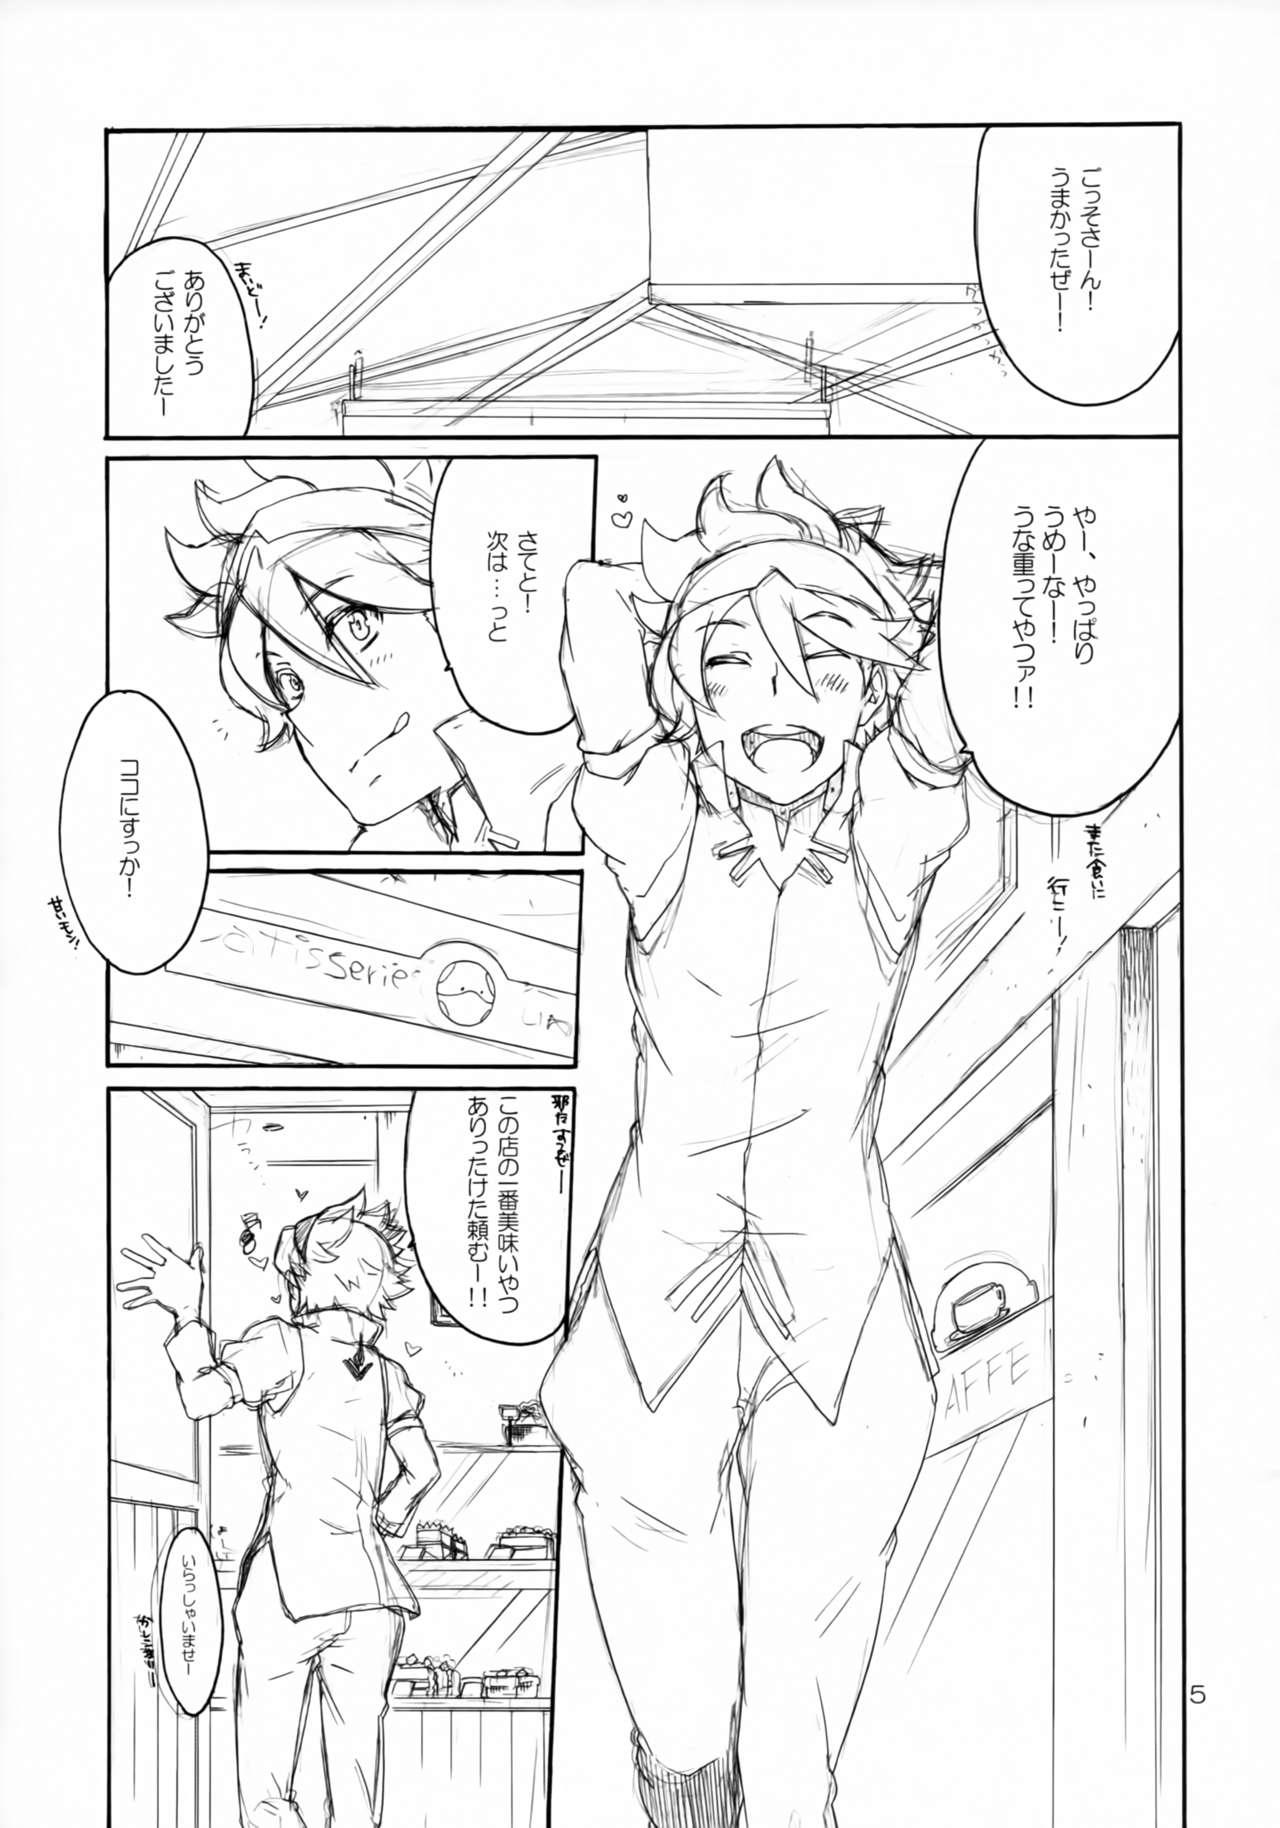 Home sweets panic - Gundam build fighters Black Hair - Page 4